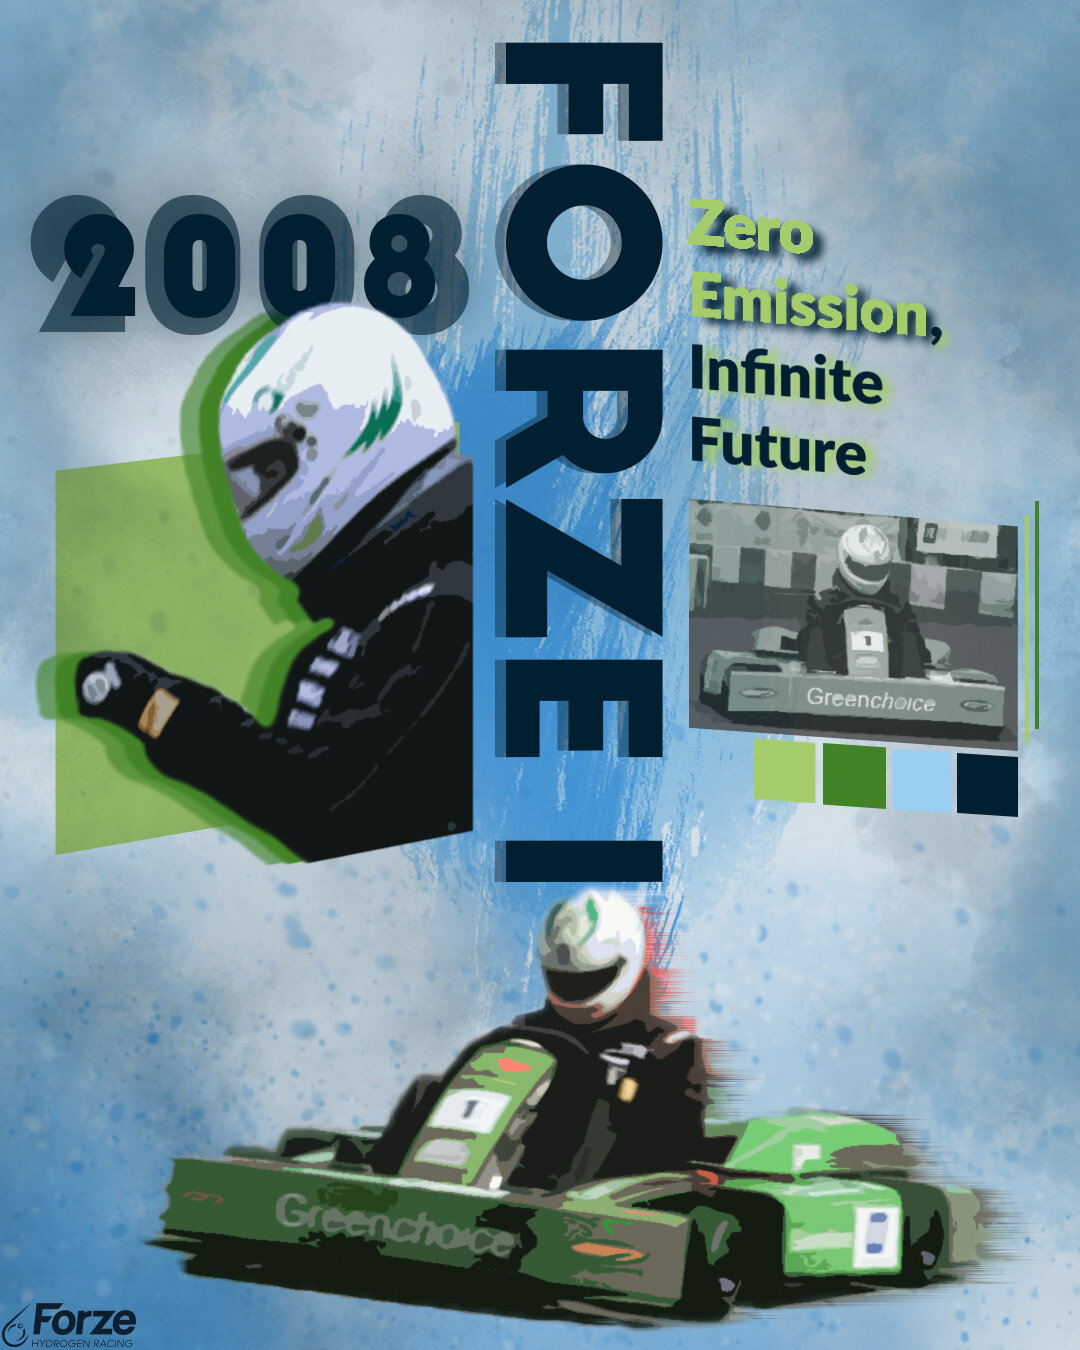 Today is the last Throwback Tuesday!

The past few weeks we've been going further back in time, counting down to our very first car, the Forze I! The Forze I was the first vehicle ever to win a hydrogen fuel cell race in the Formula Zero Championship